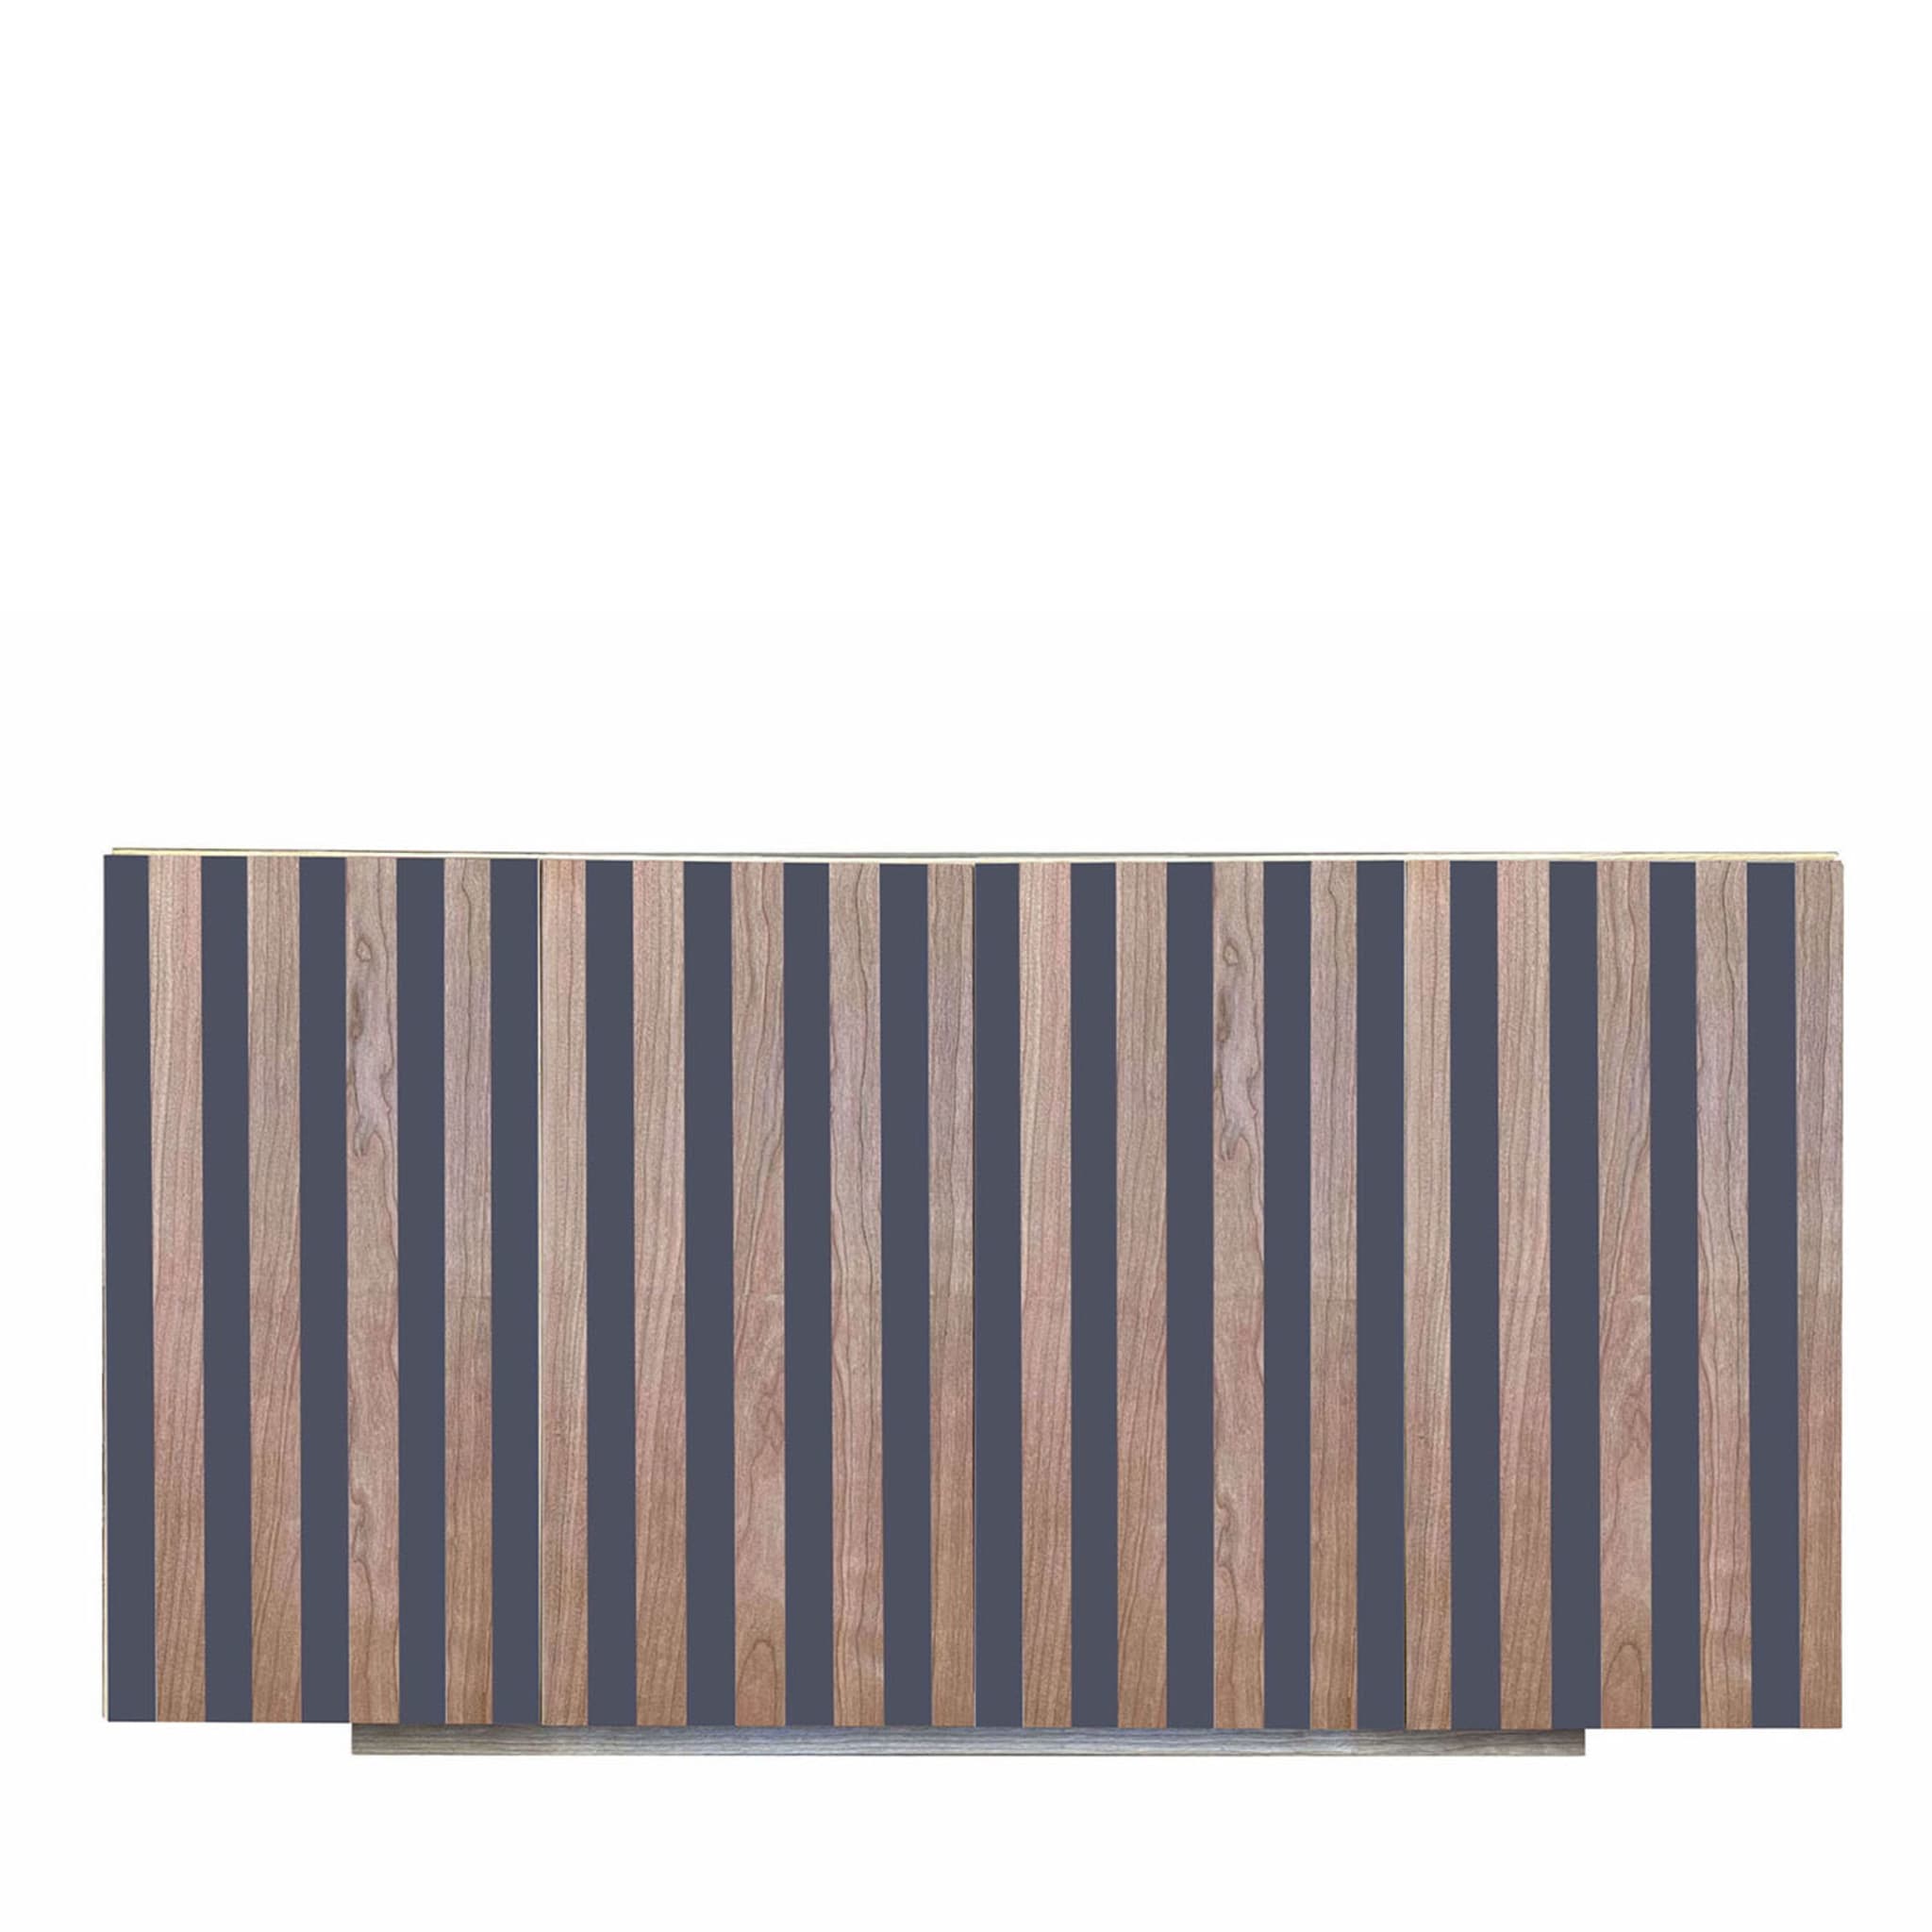 Md5 4-Door Striped Sideboard by Meccani Studio - Main view